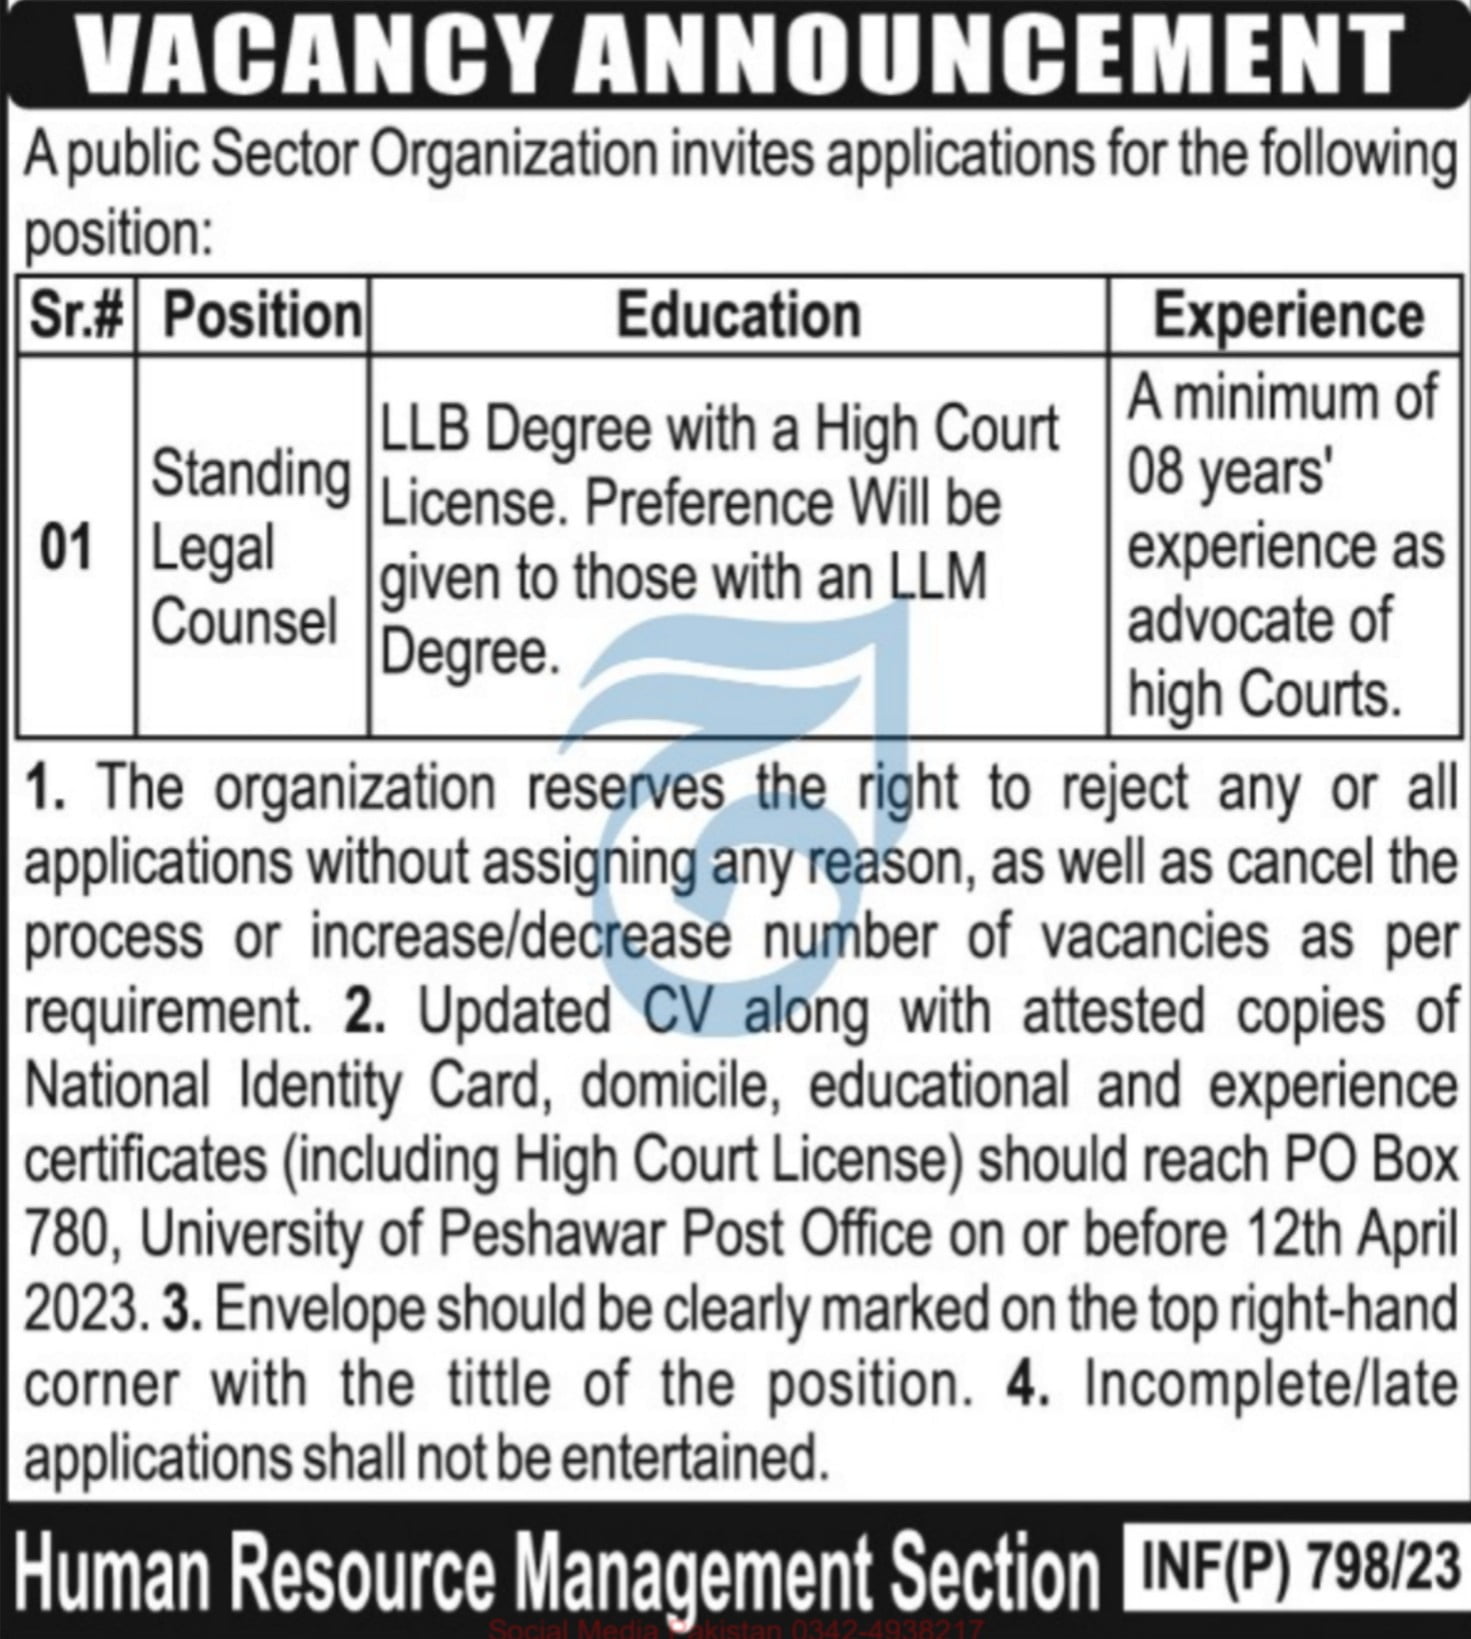 Latest Standing Legal Counsel job in Public Sector Organization in Peshawar 2023